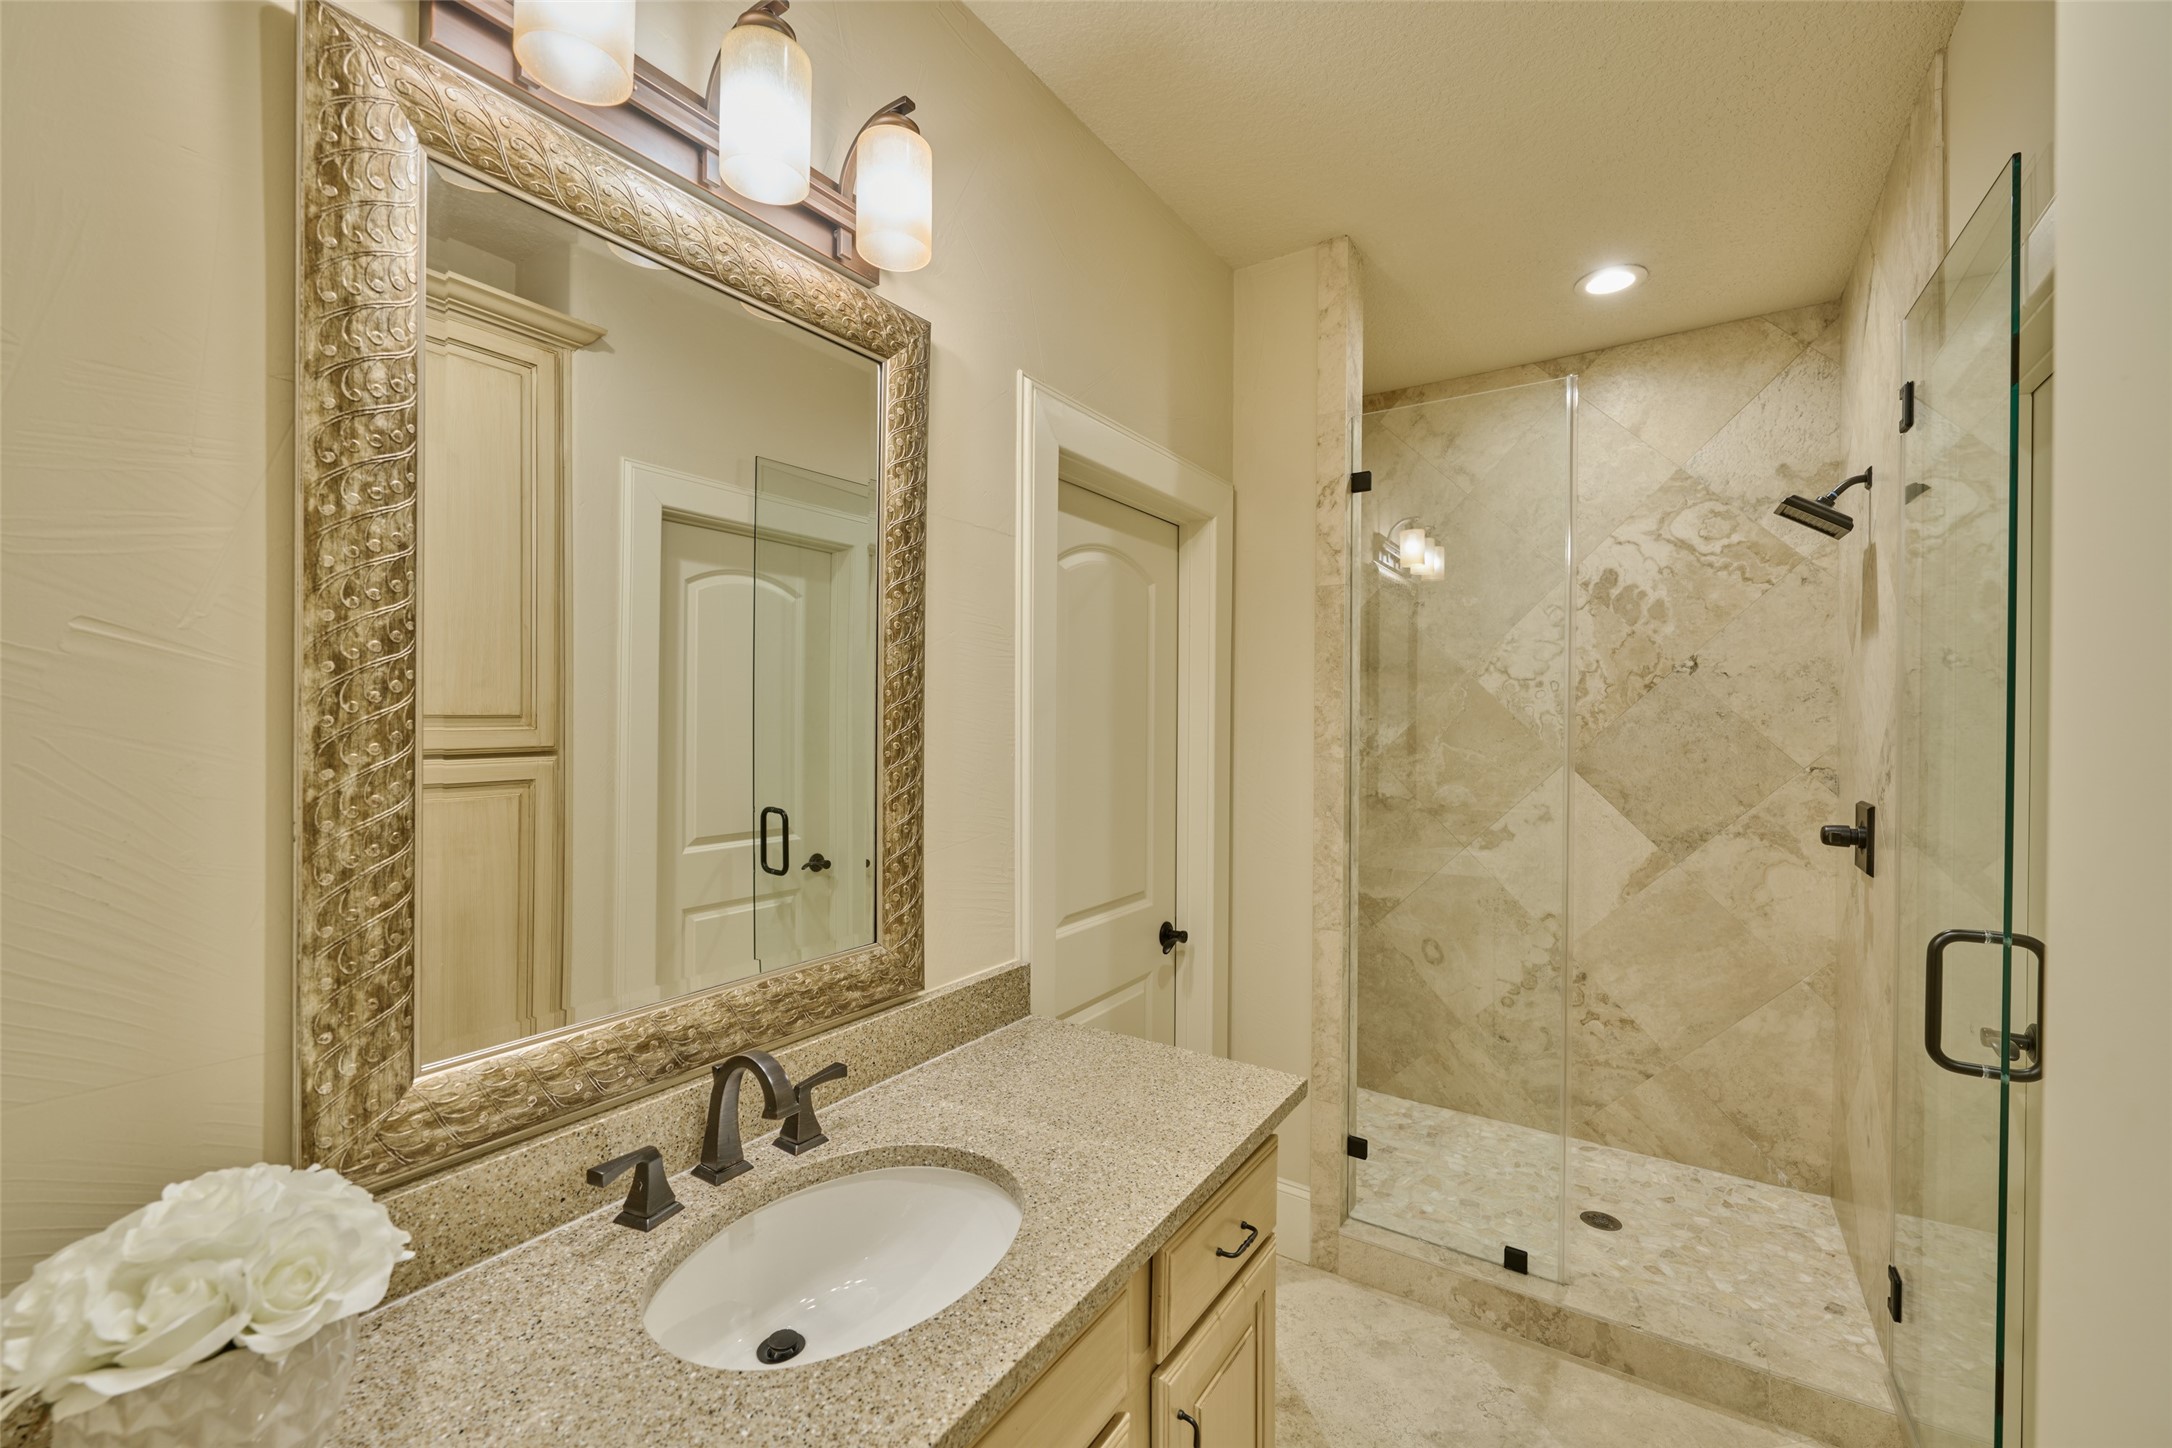 Upstairs, all 3 bedrooms have full baths, bathroom walls are travertine marble, walk-in closets, and all share a full-size laundry room on the second floor.